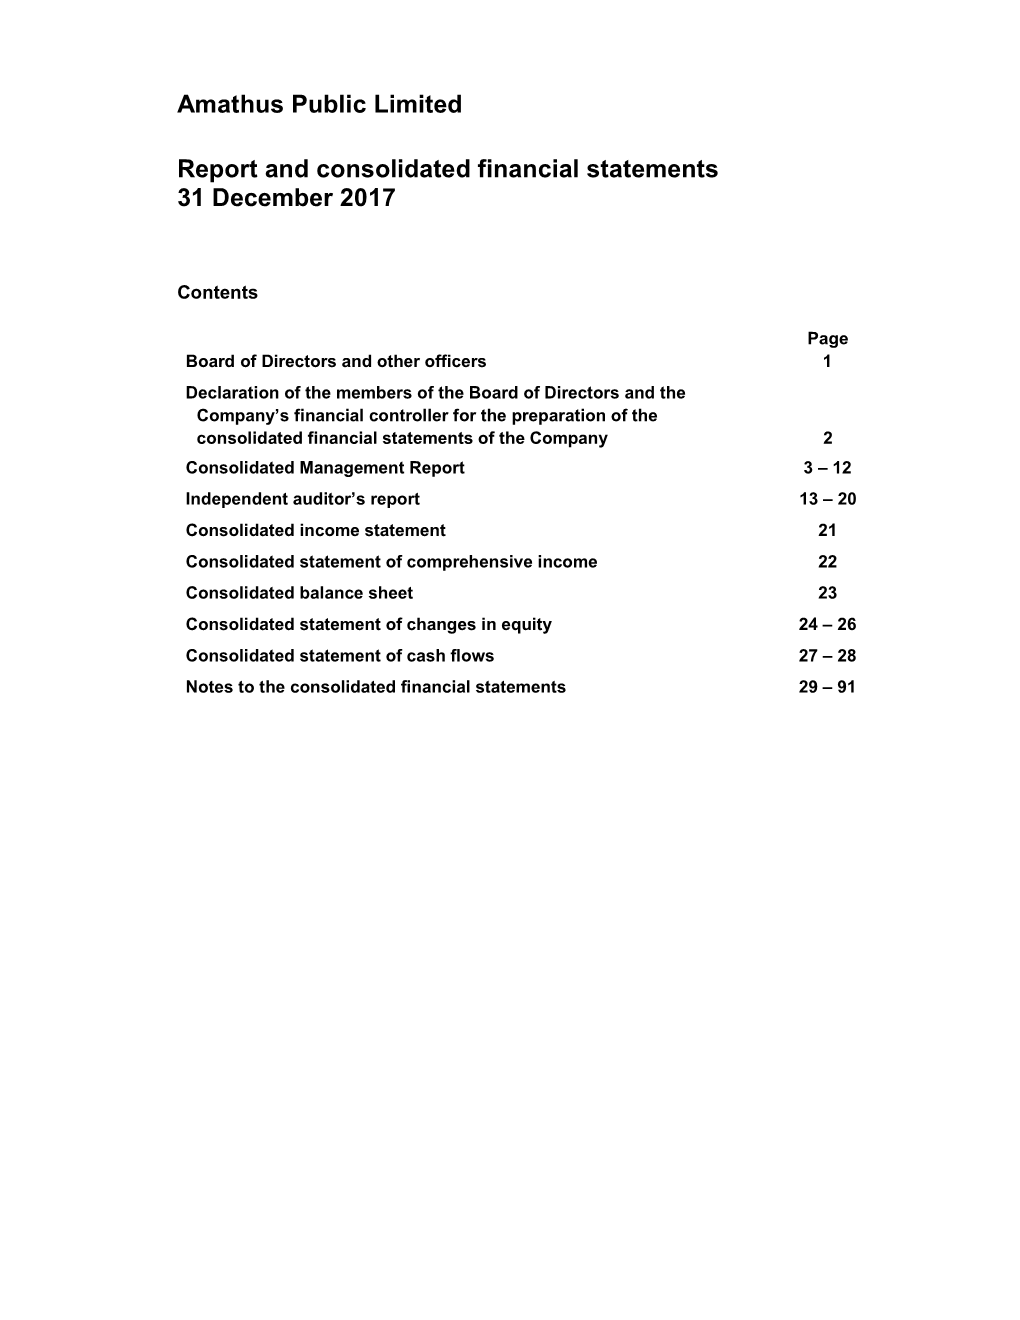 Amathus Public Limited Report and Consolidated Financial Statements